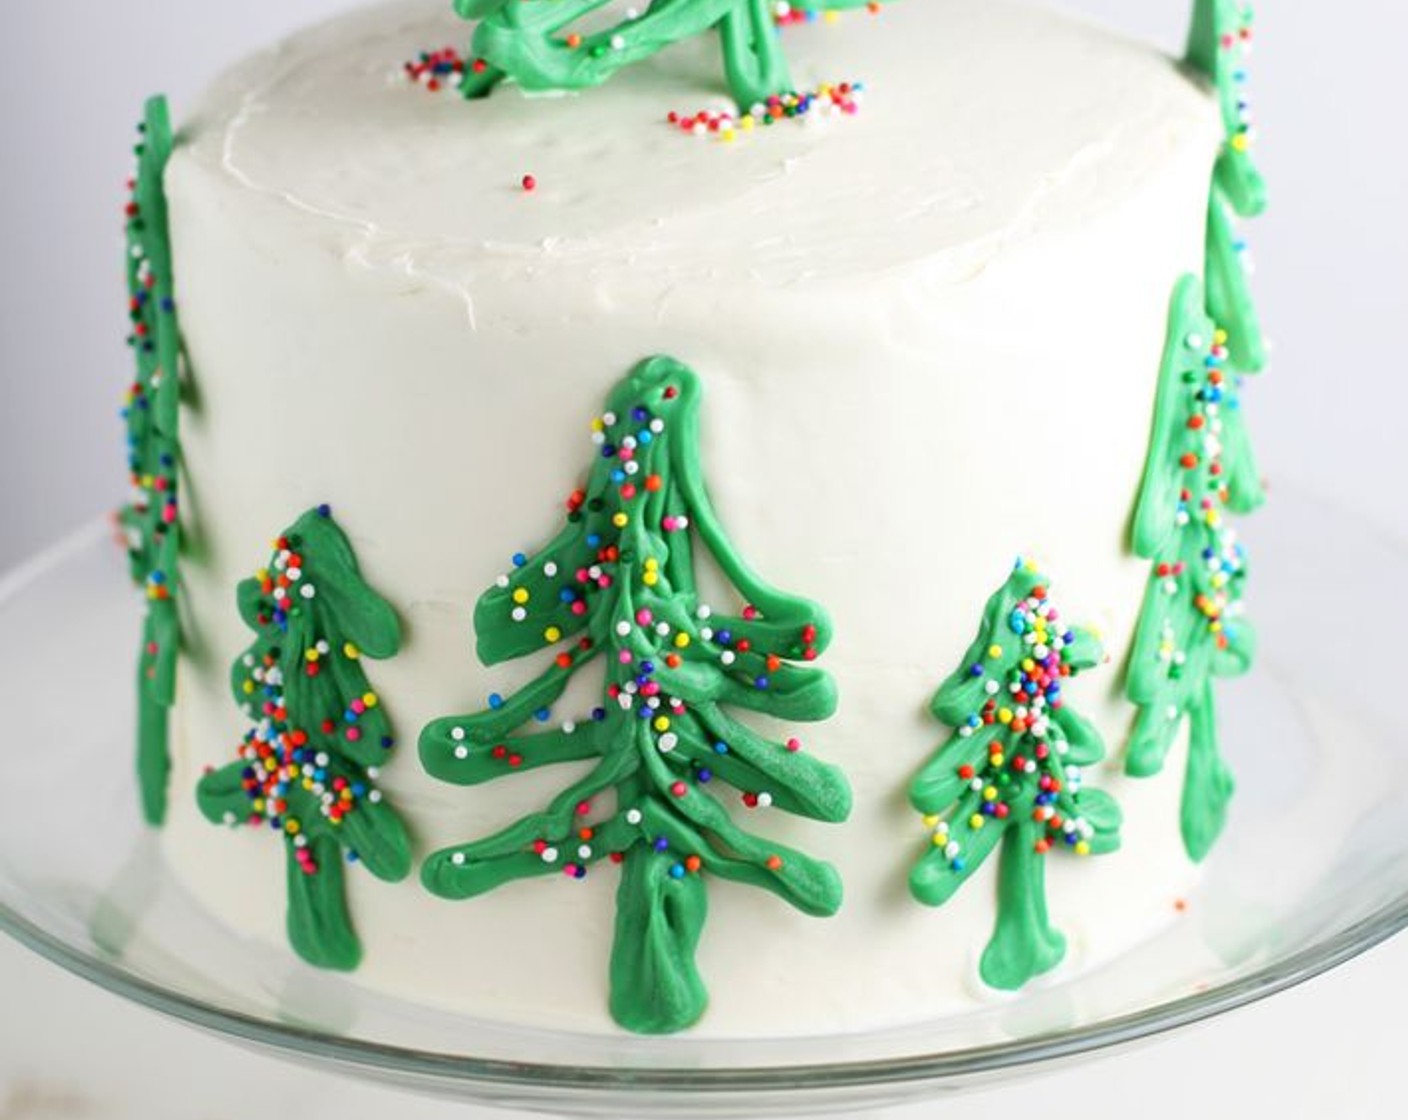 step 8 Continue frosting the entire cake. Smooth the sides with an offset icing spatula. Gently add chilled candy Christmas trees to the side of cake and on top, if desired. Serve immediately or store in refrigerator for up to 5 days.